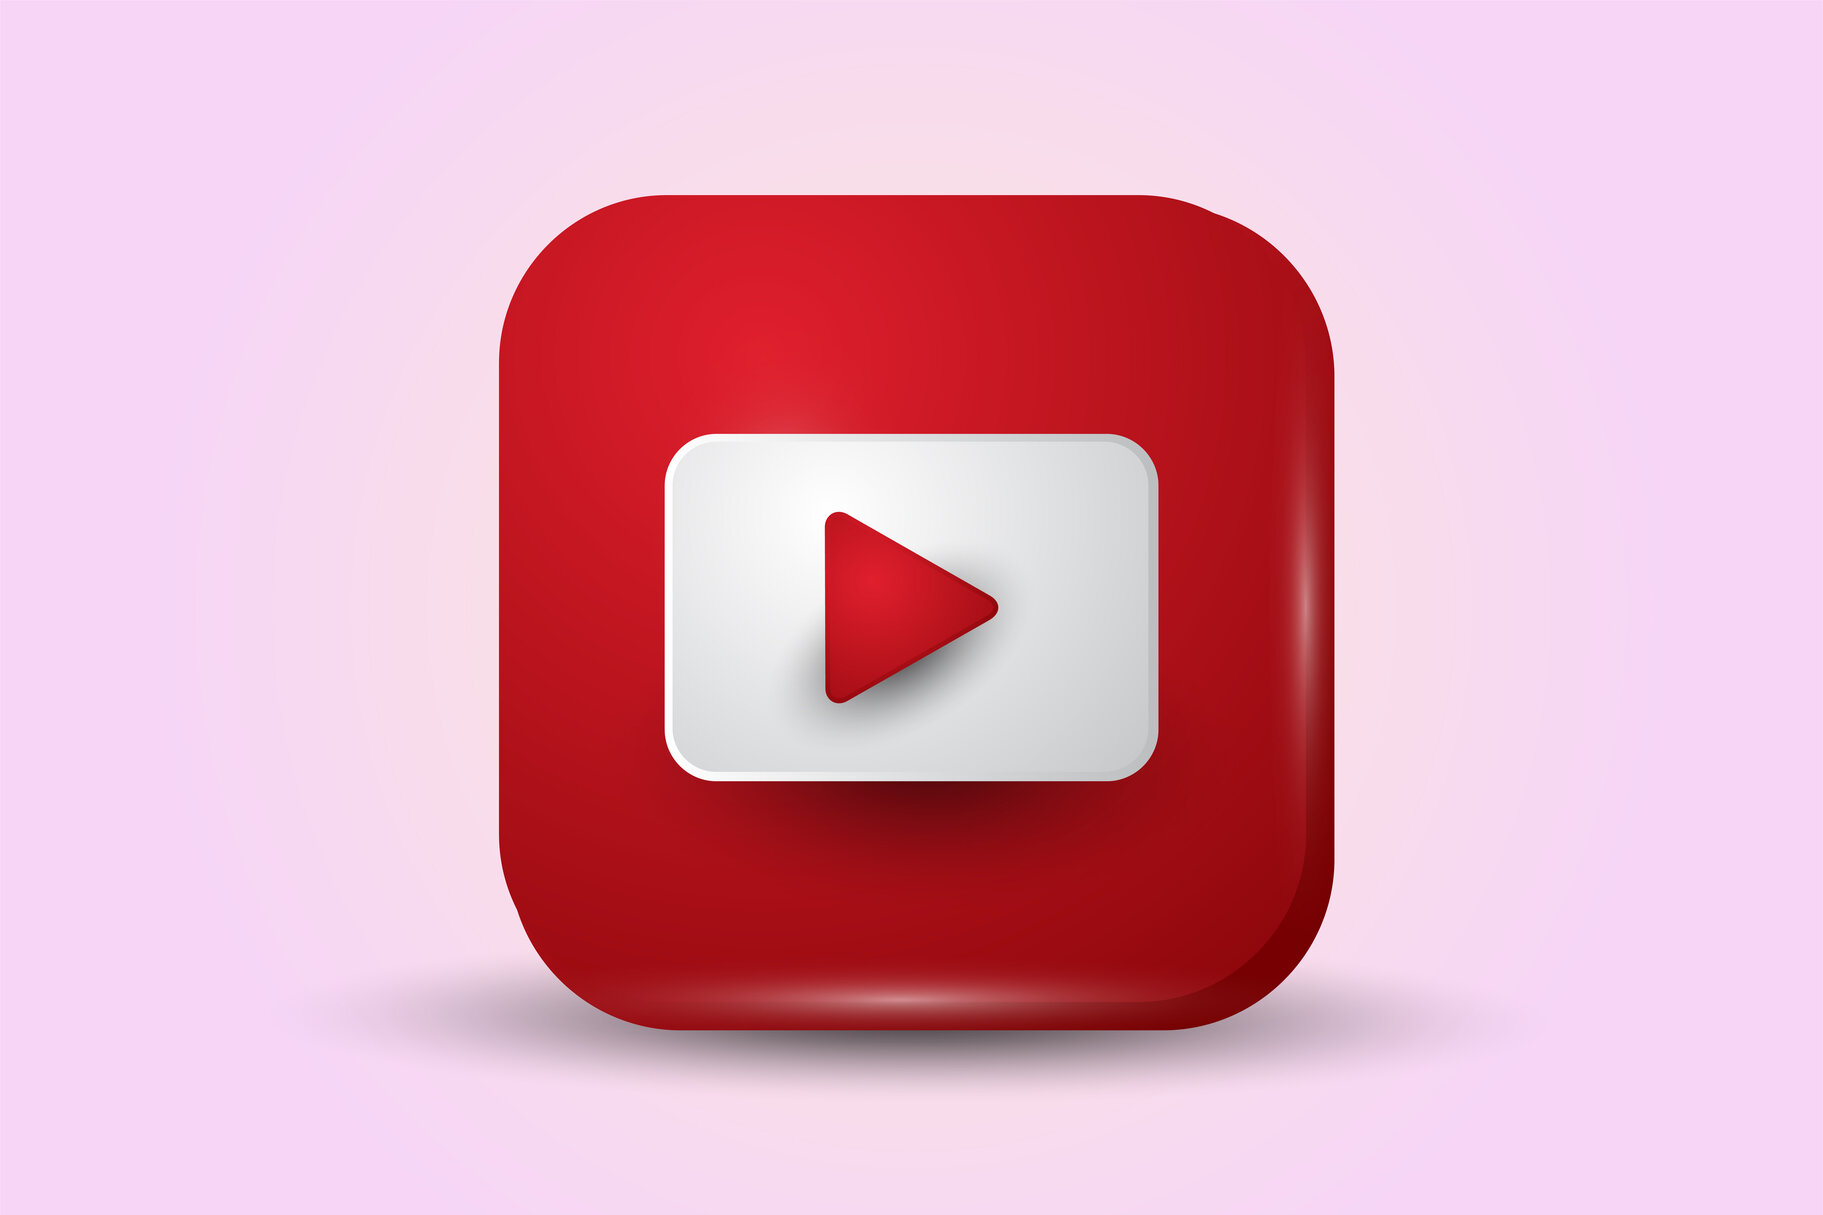 download music from youtube to itunes free